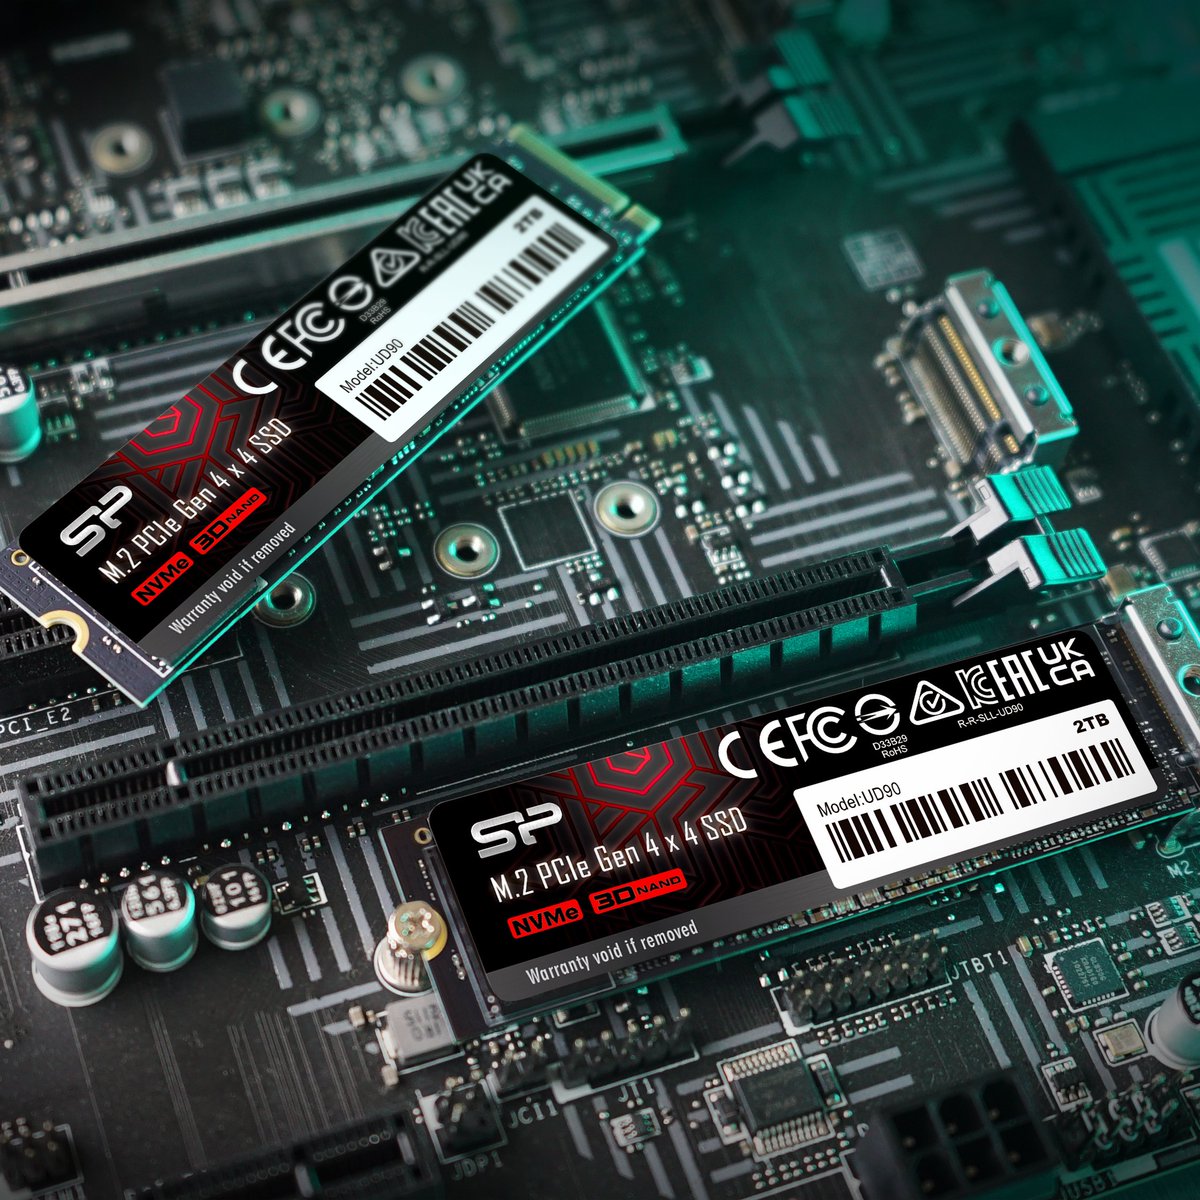 What upgrade do you and your system need? 🤨 Our Gen4 PCIe UD90 strikes the perfect balance between performance and cost. Check it out on Amazon: bit.ly/3CGspUY #SP #gamer #pcbuild #storage #ps5 #amazondeals #amazon #gaming #gamingssd #bestforgaiming #PC